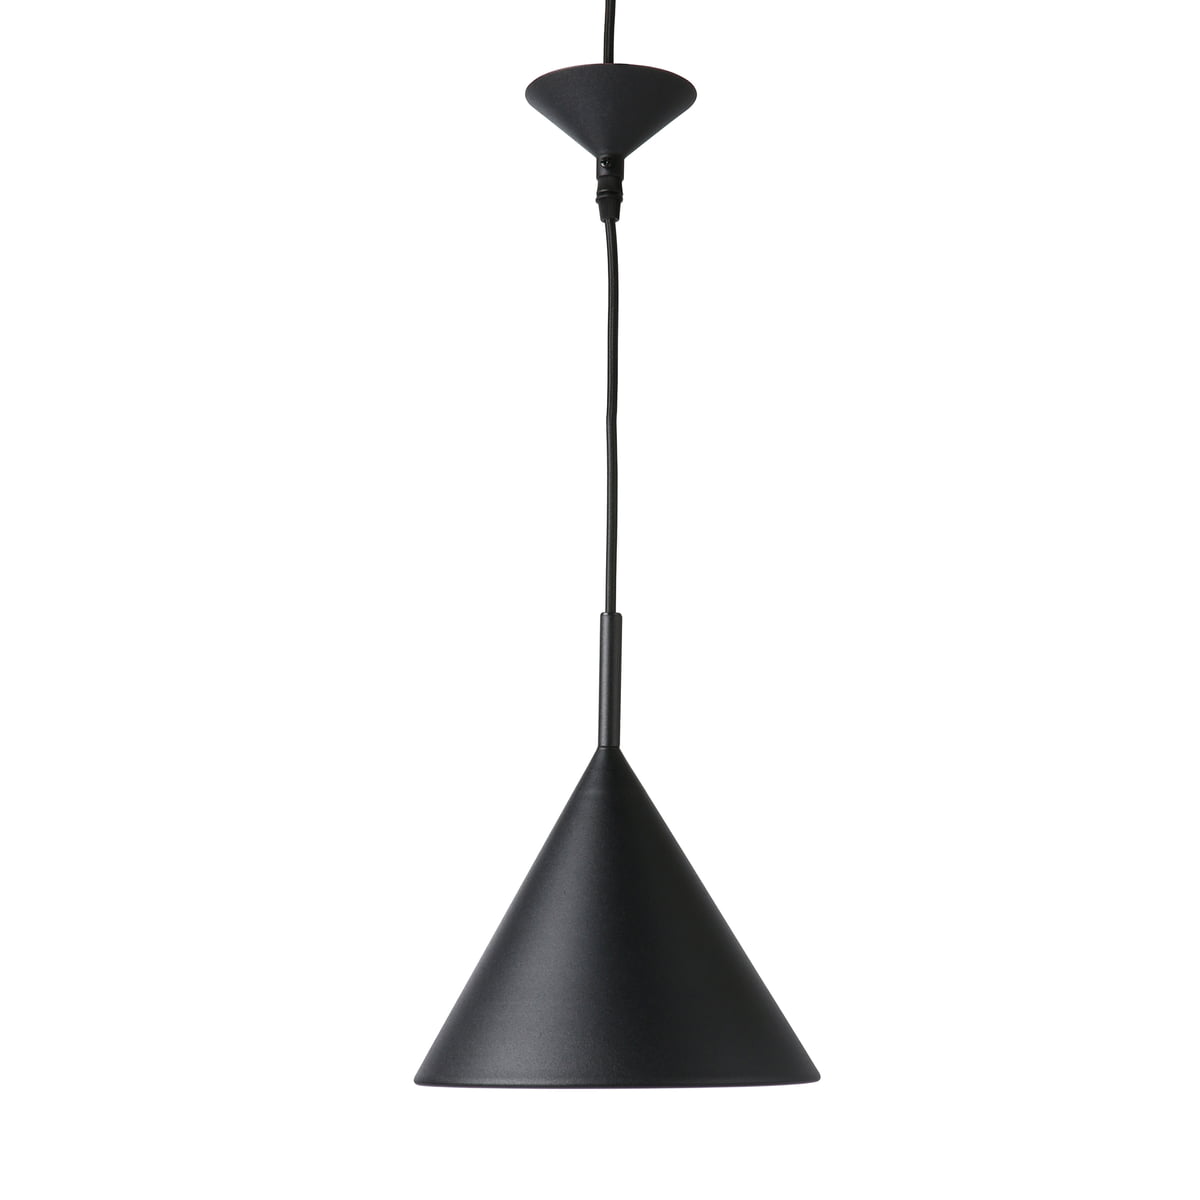 Hkliving - Triangle lamp | Connox